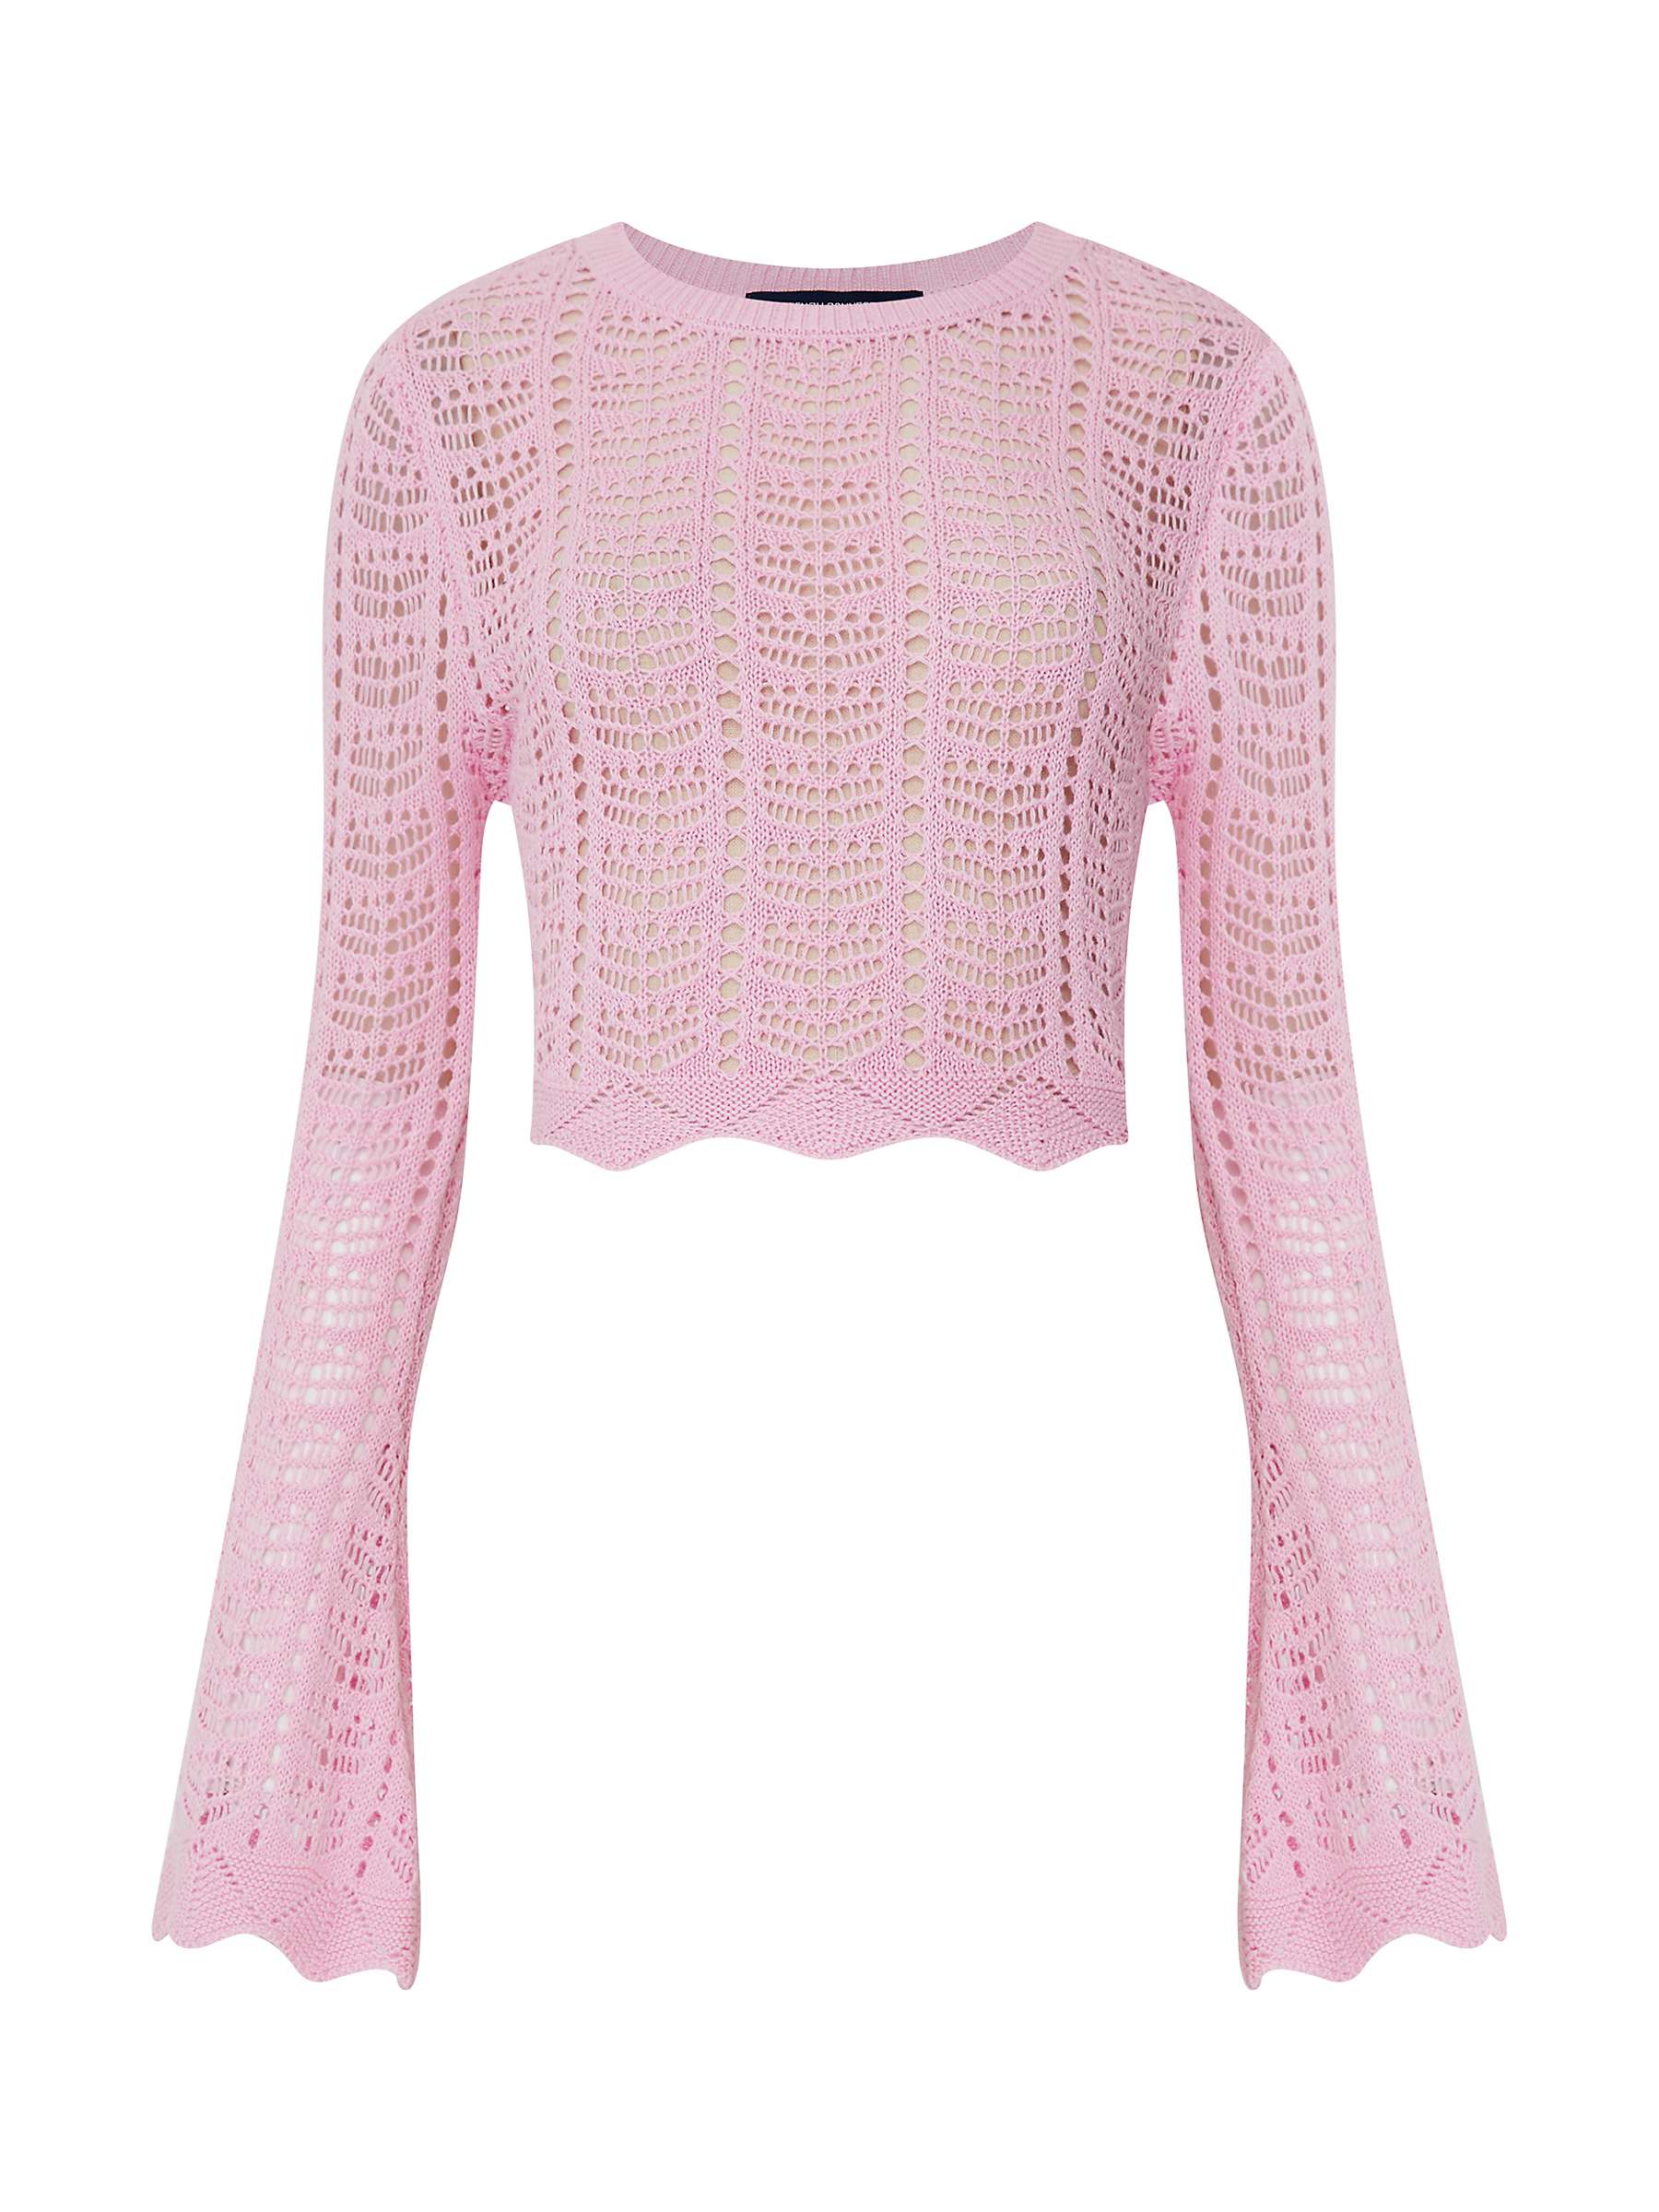 Buy French Connection Nolan Crochet Jumper, Strawberry Shake Online at johnlewis.com